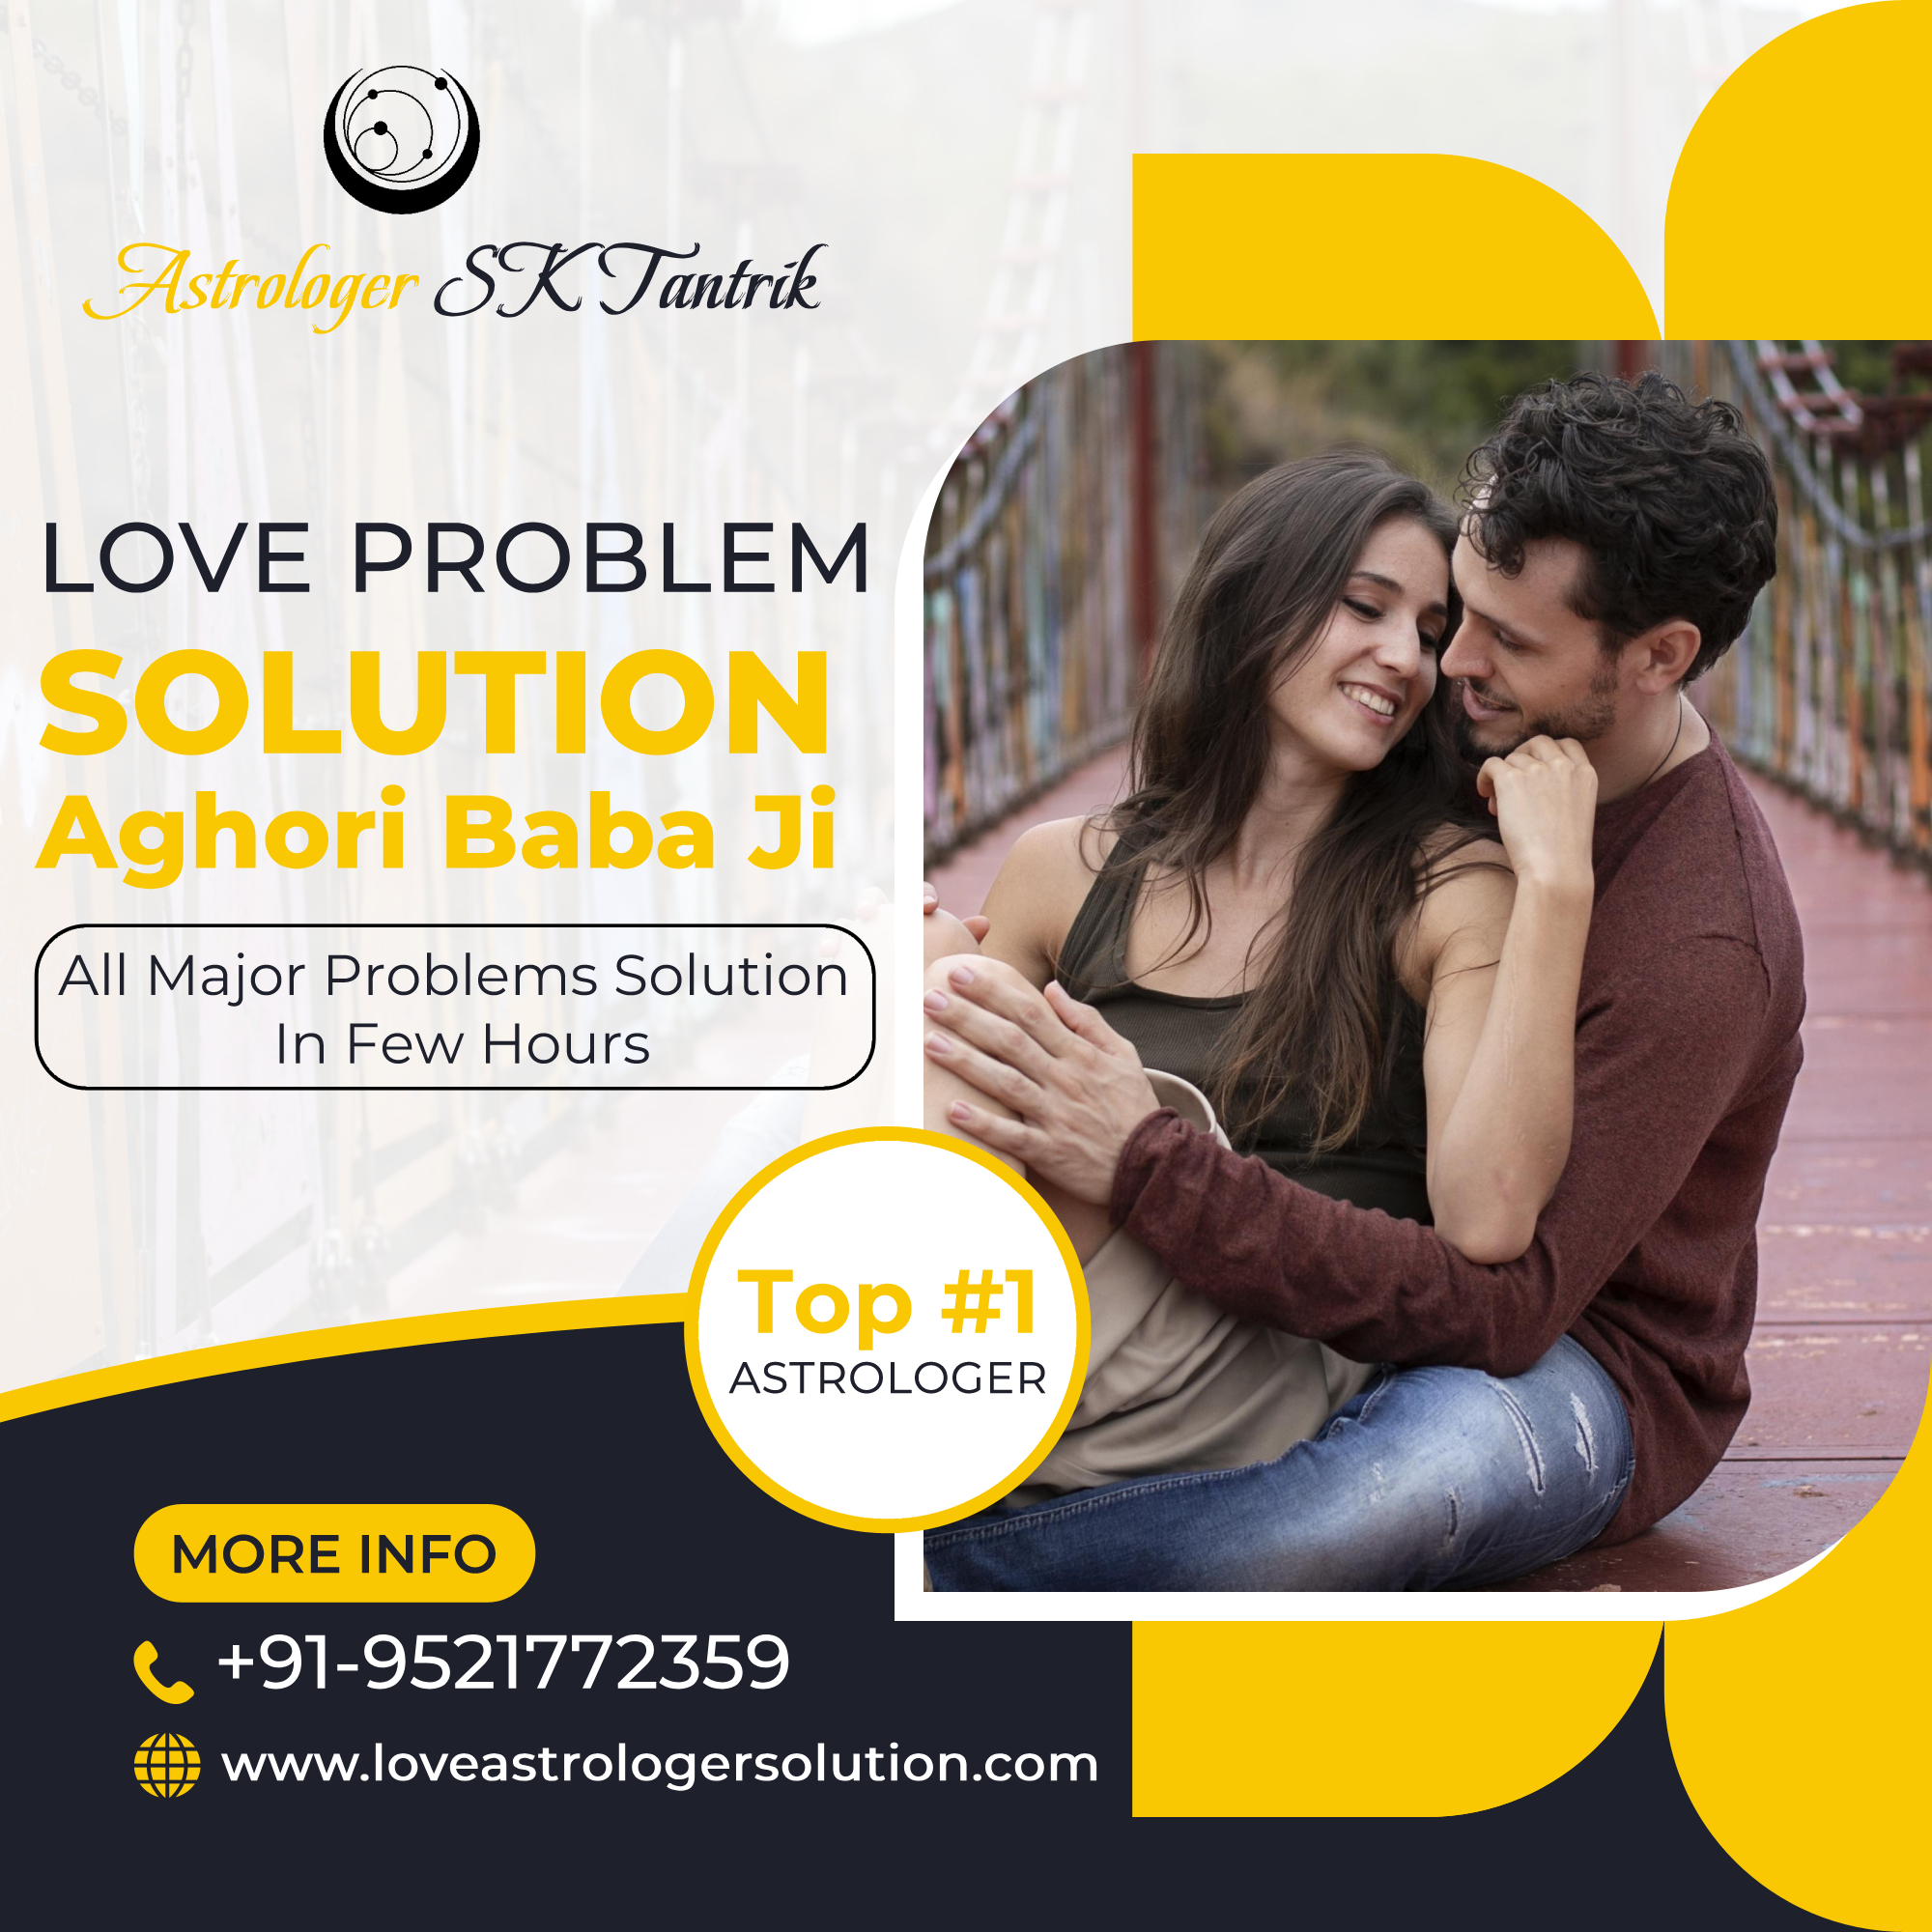 Love problem solution Aghori baba ji – Guaranteed solution without money – Love Astrologer Solution